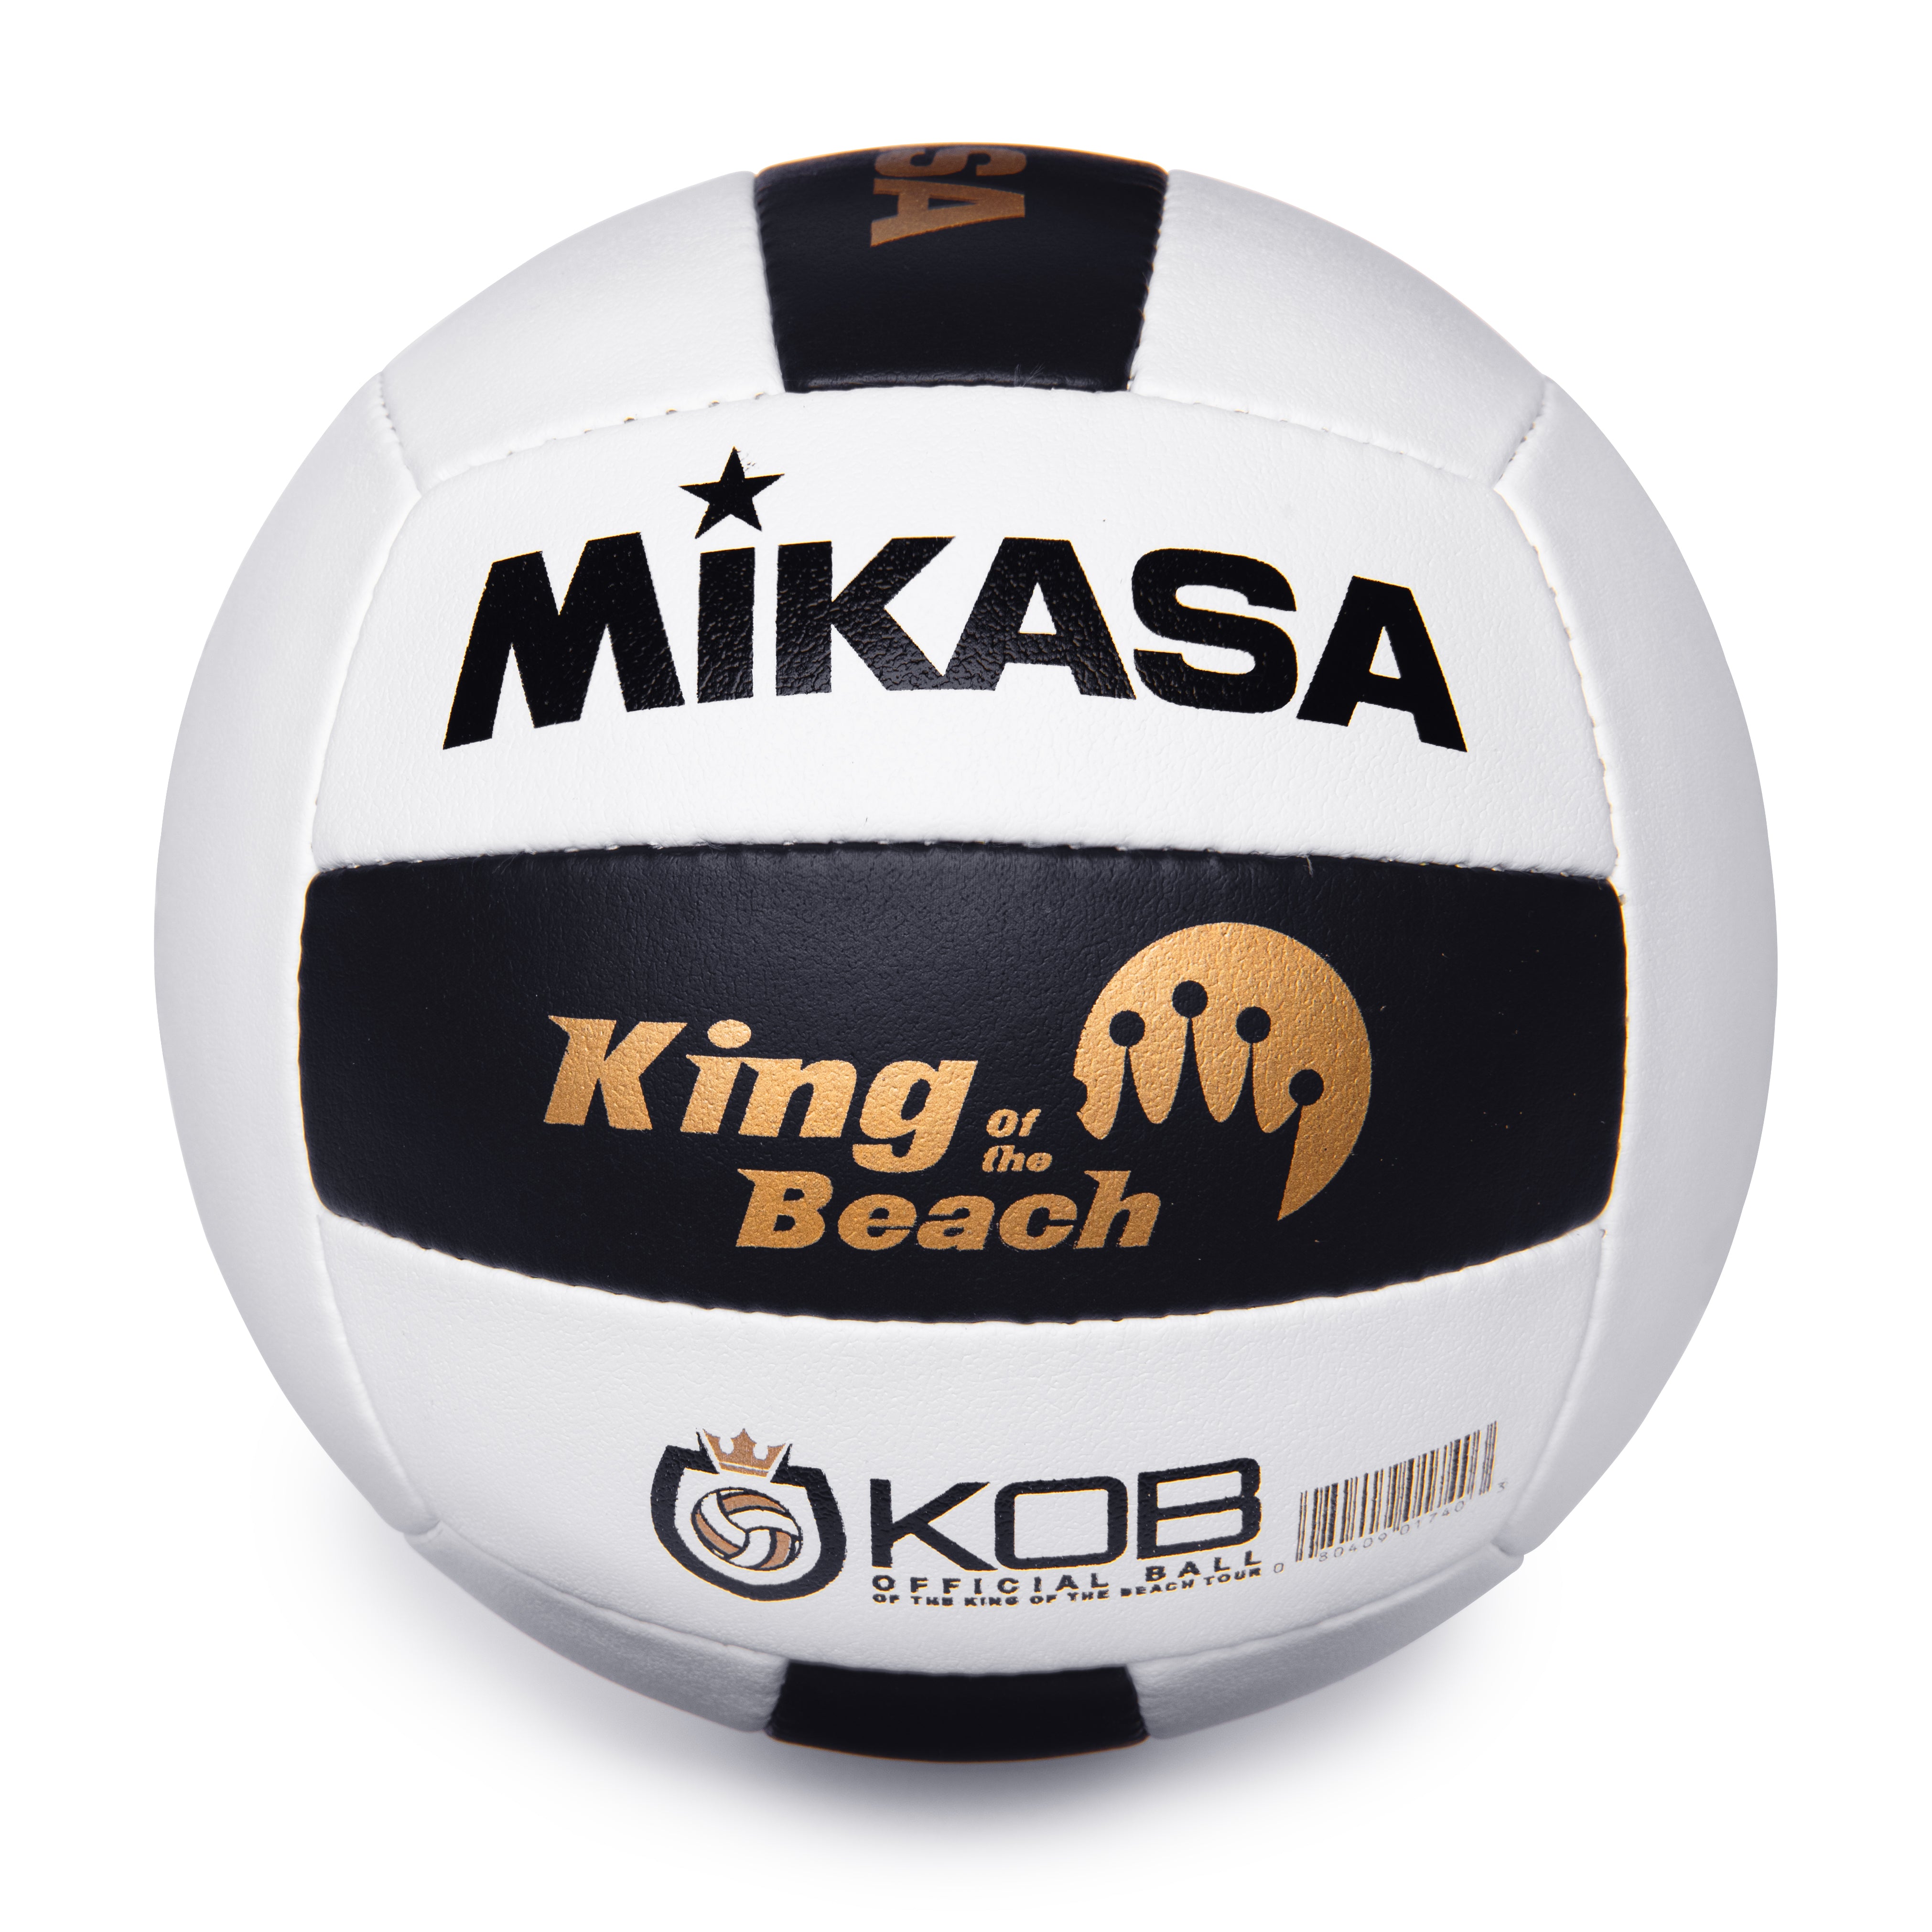 The 2024 Volleyball of Beach® by King The Miramar® Mikasa